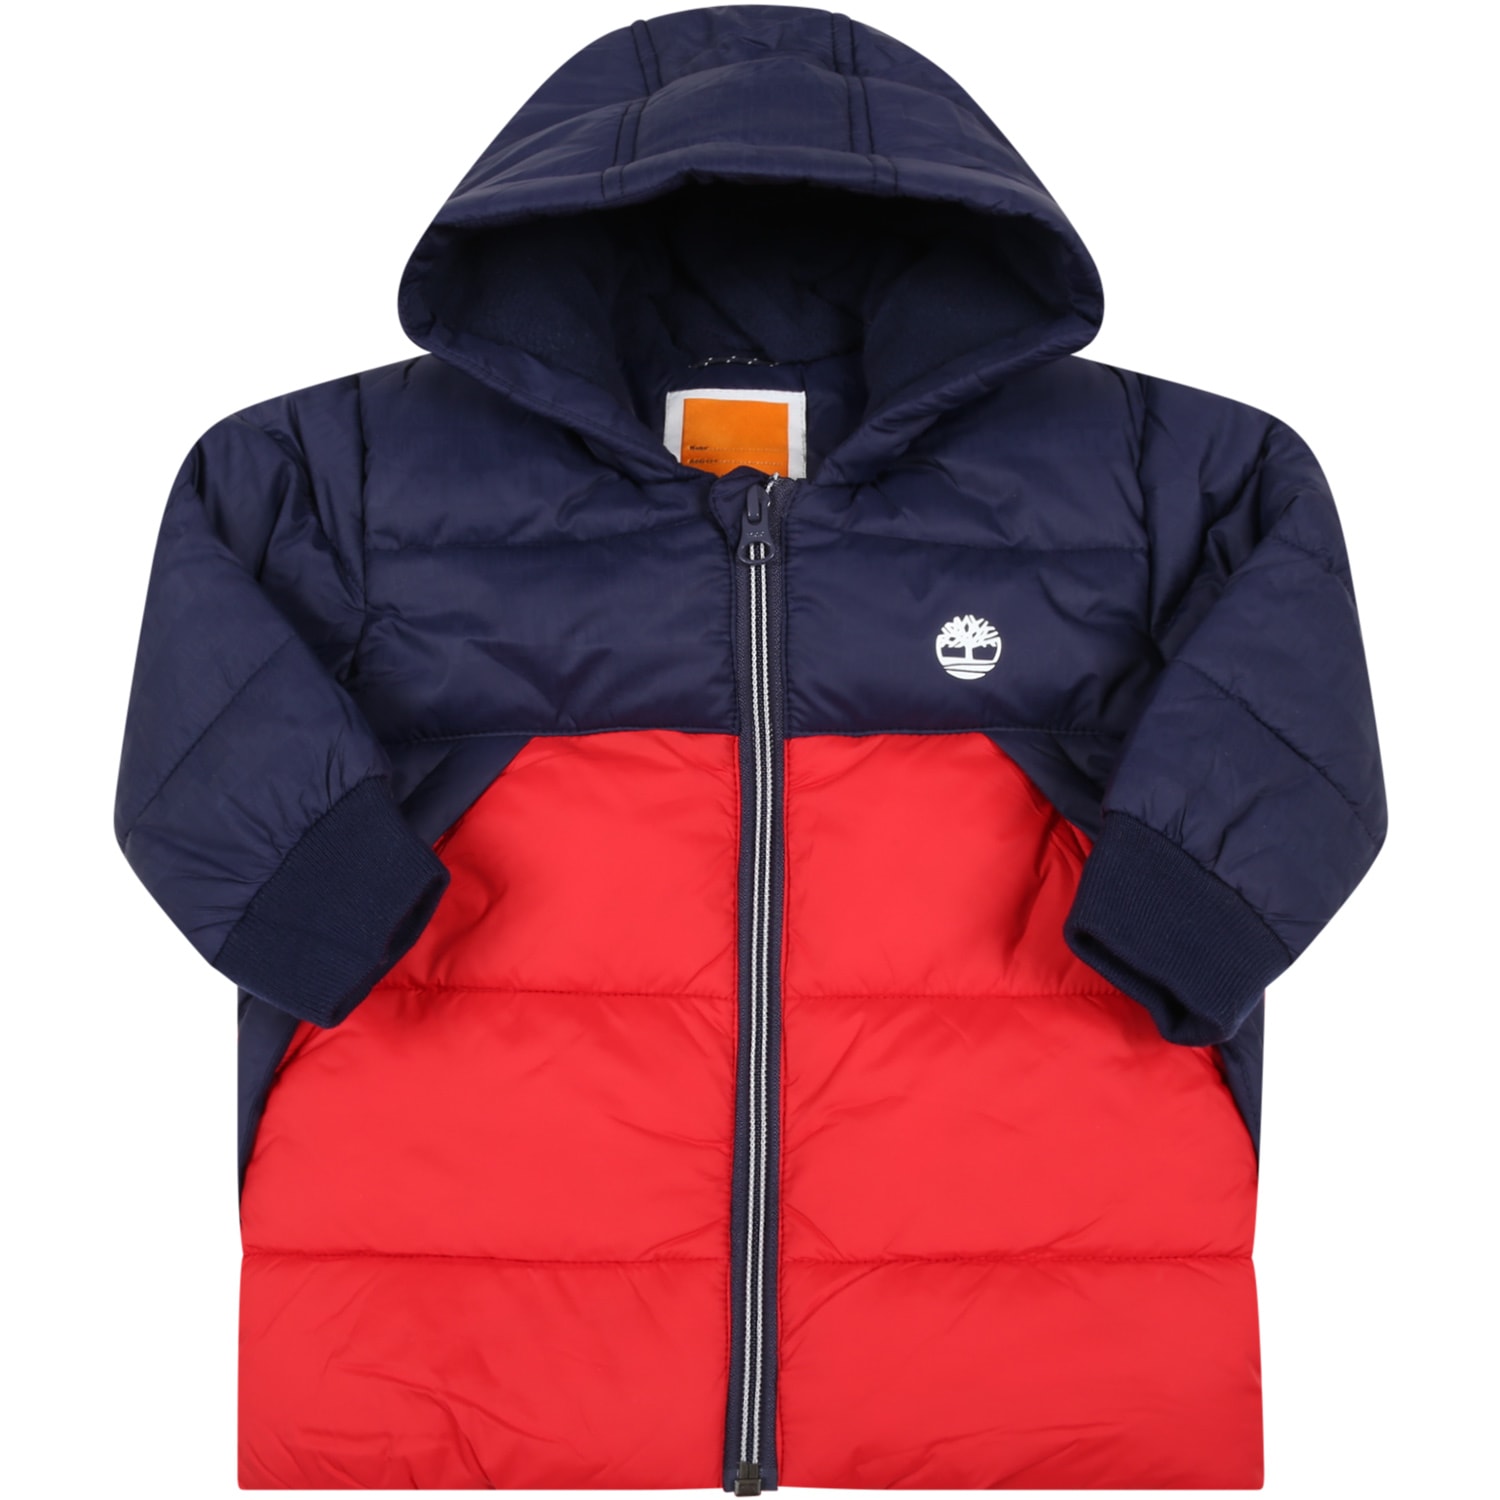 Timberland Multicolor Jacket For Baby Boy